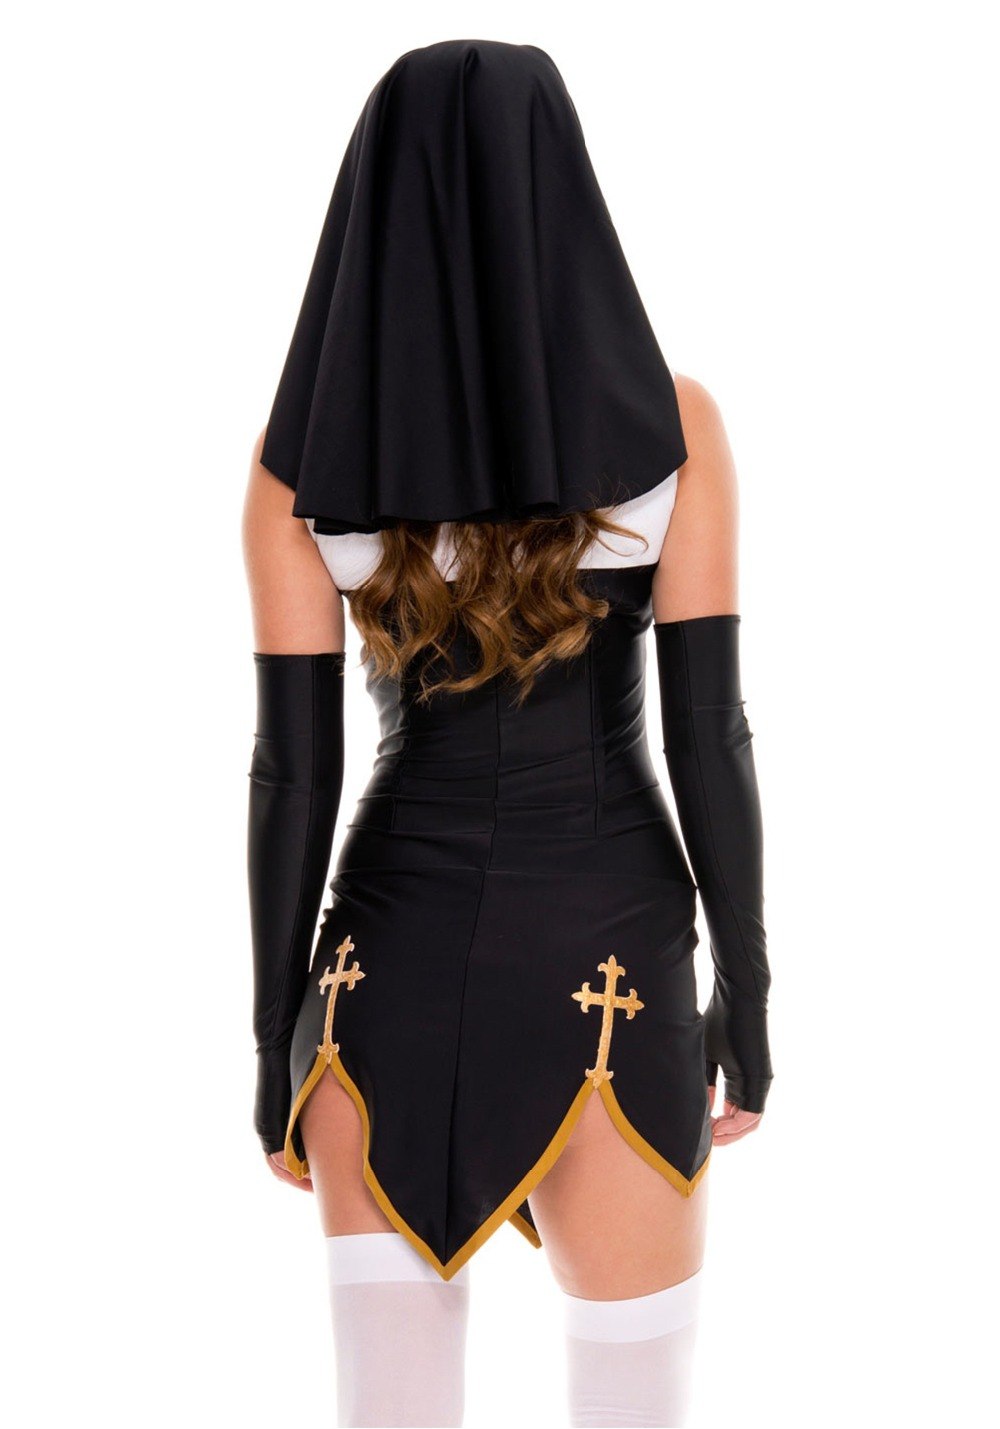 Virgin Mary Sexy Nun Costume Adult Women Cosplay Dress With Black Hood For Halloween Sister Cosplay Party Costume Nun Outfits